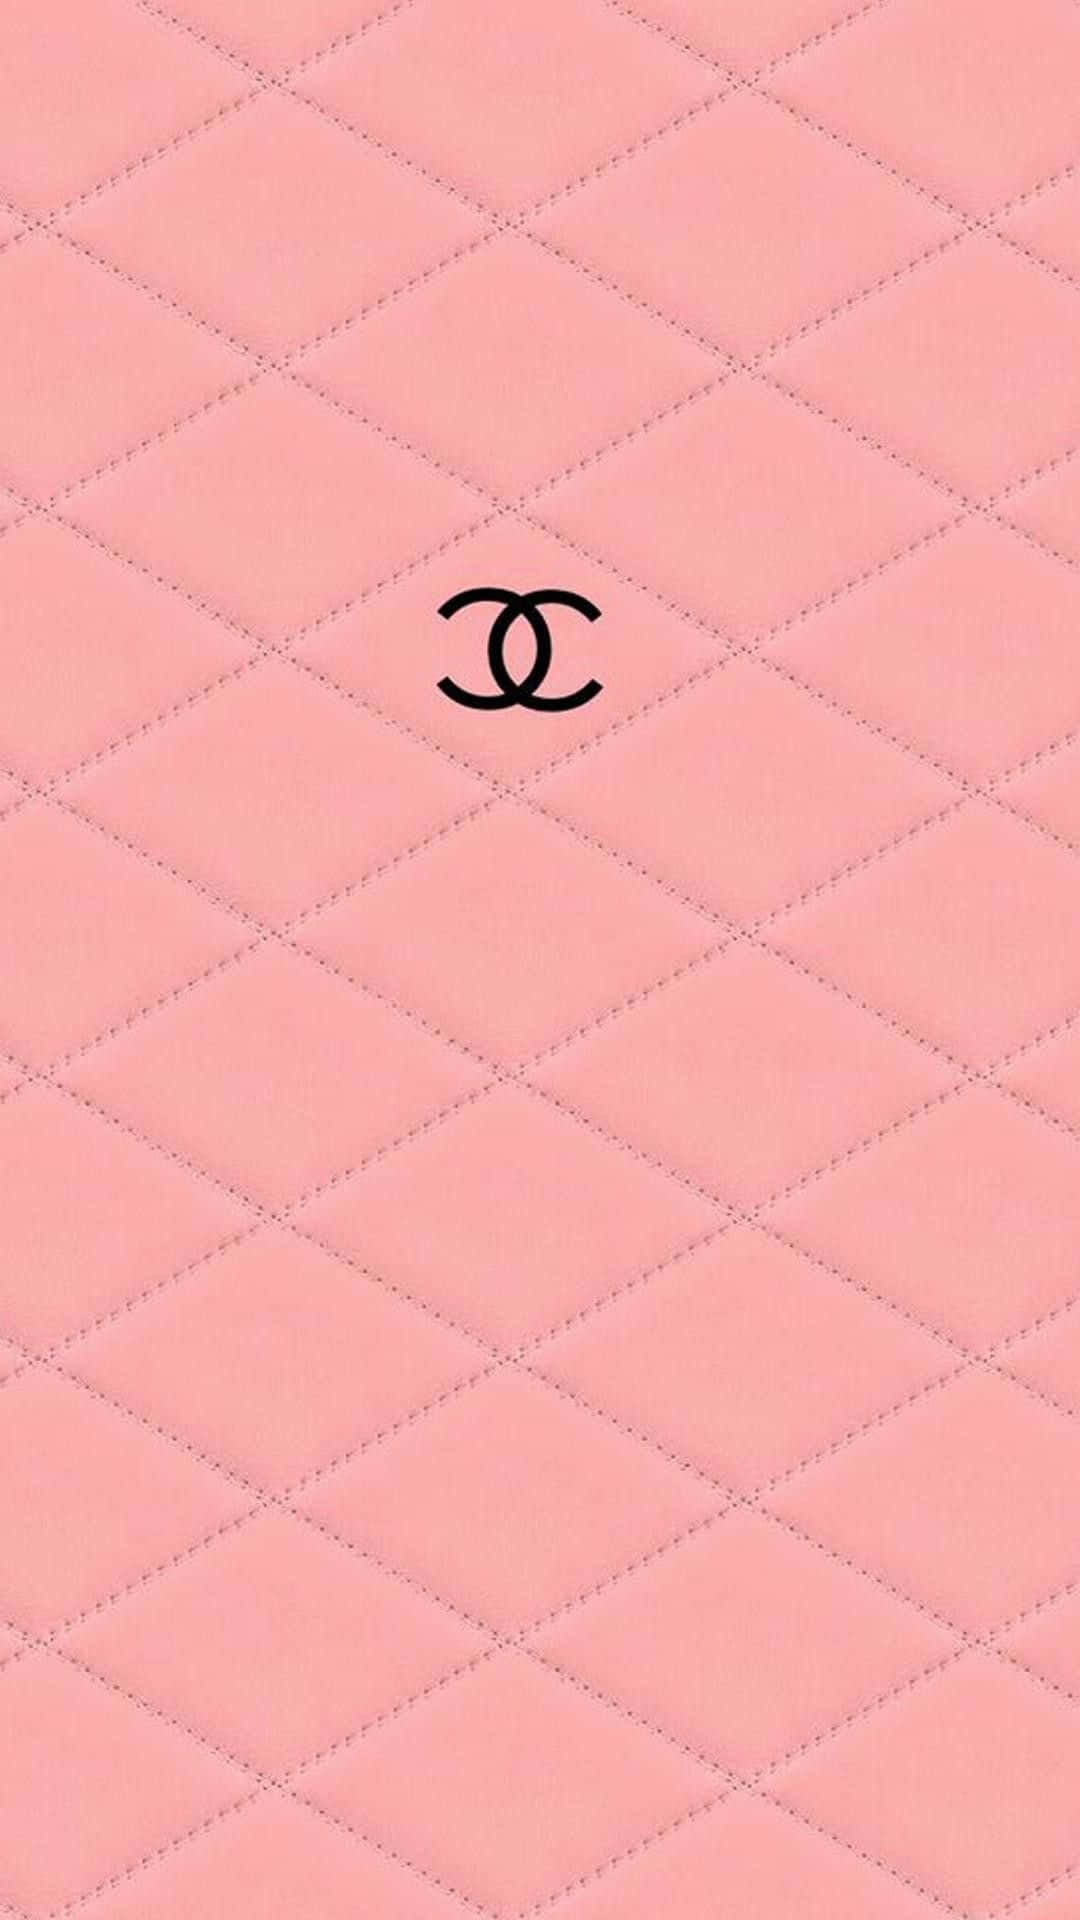 The timeless and iconic Chanel logo